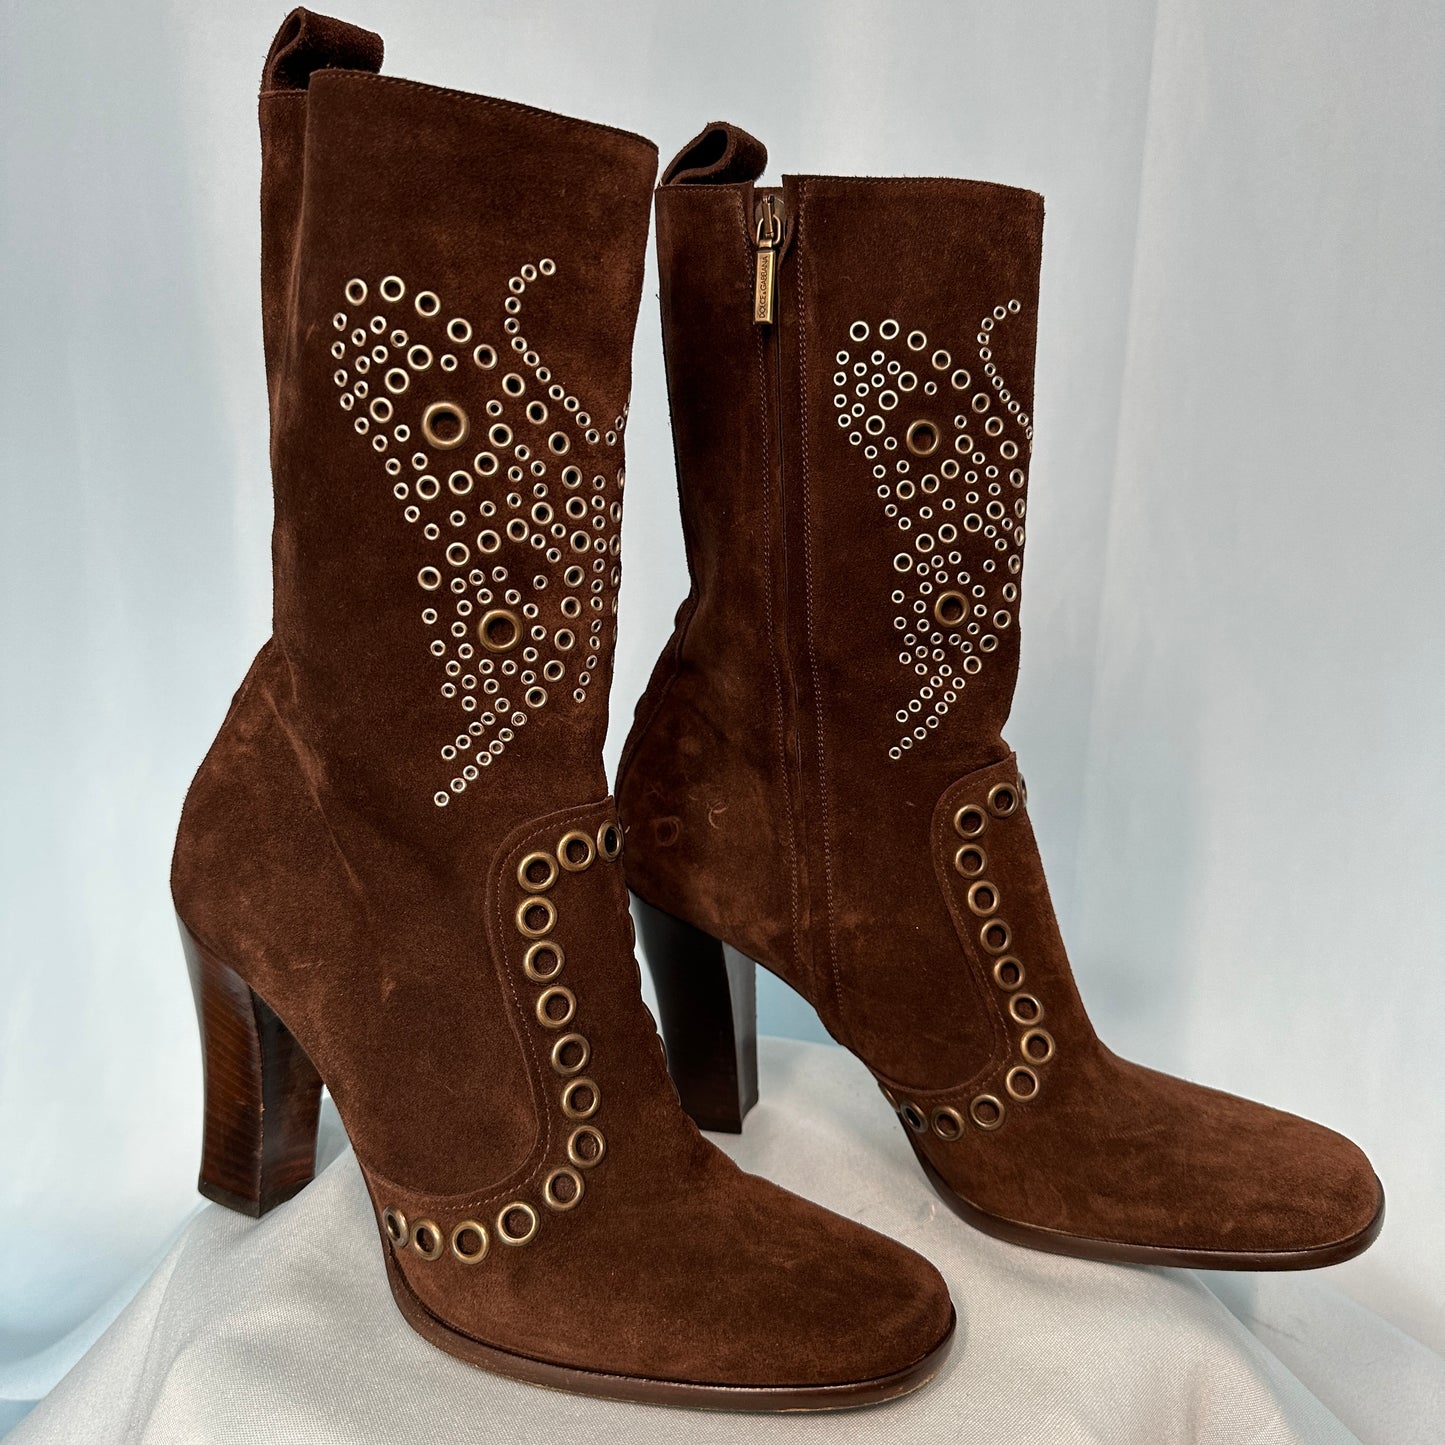 Dolce & Gabbana Butterfly Studded Brown Suede Boots